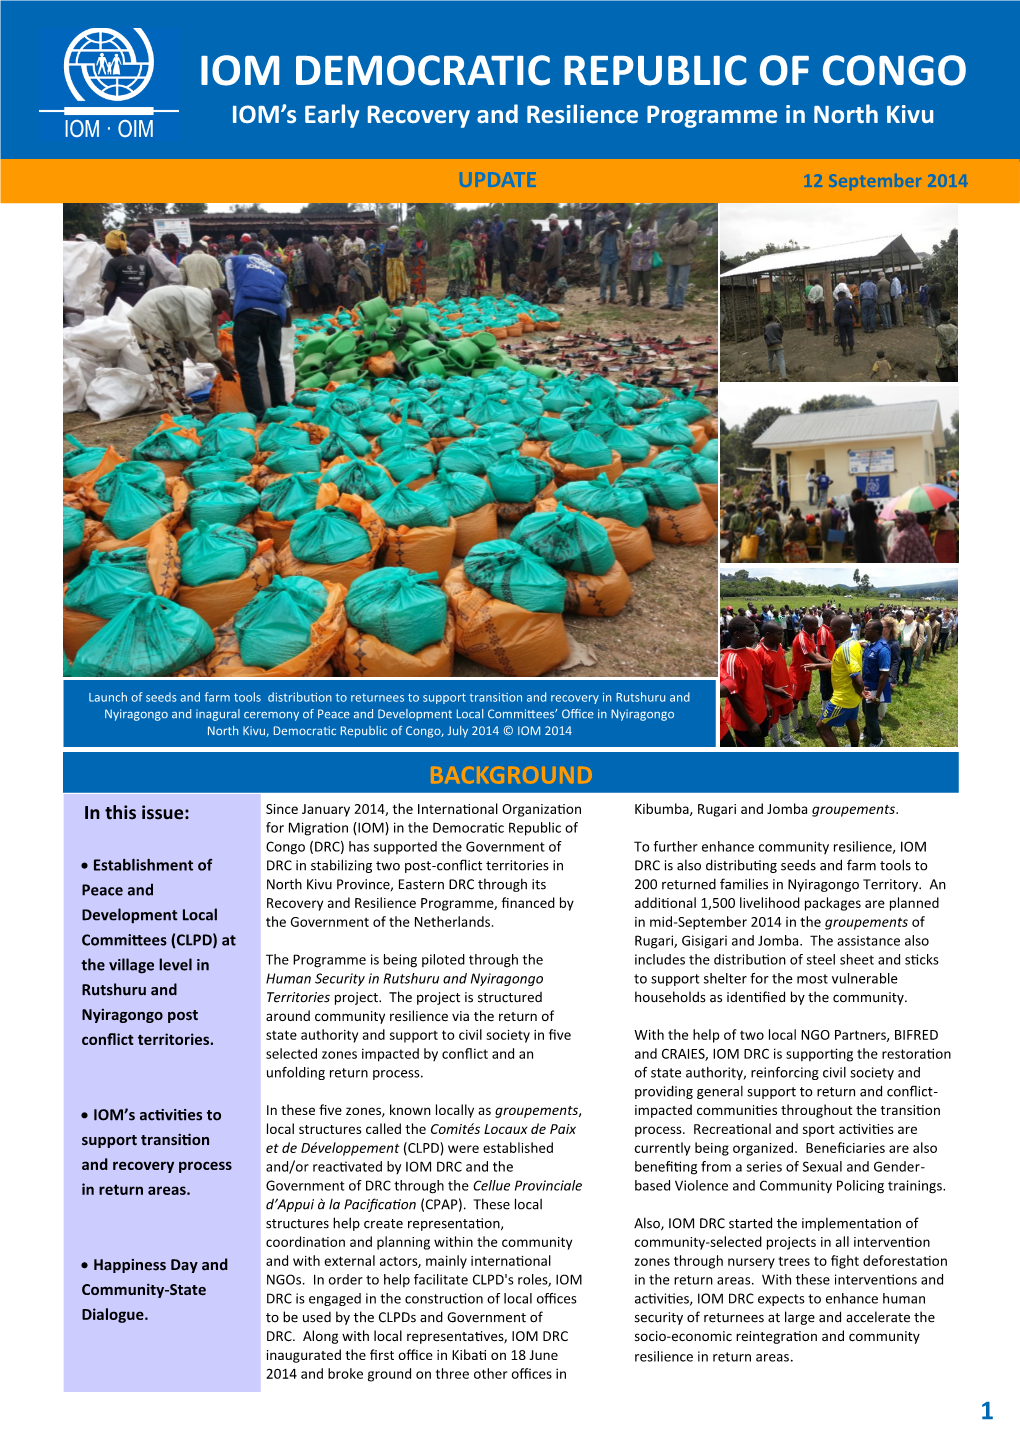 IOM's Early Recovery and Resilience Programme in North Kivu